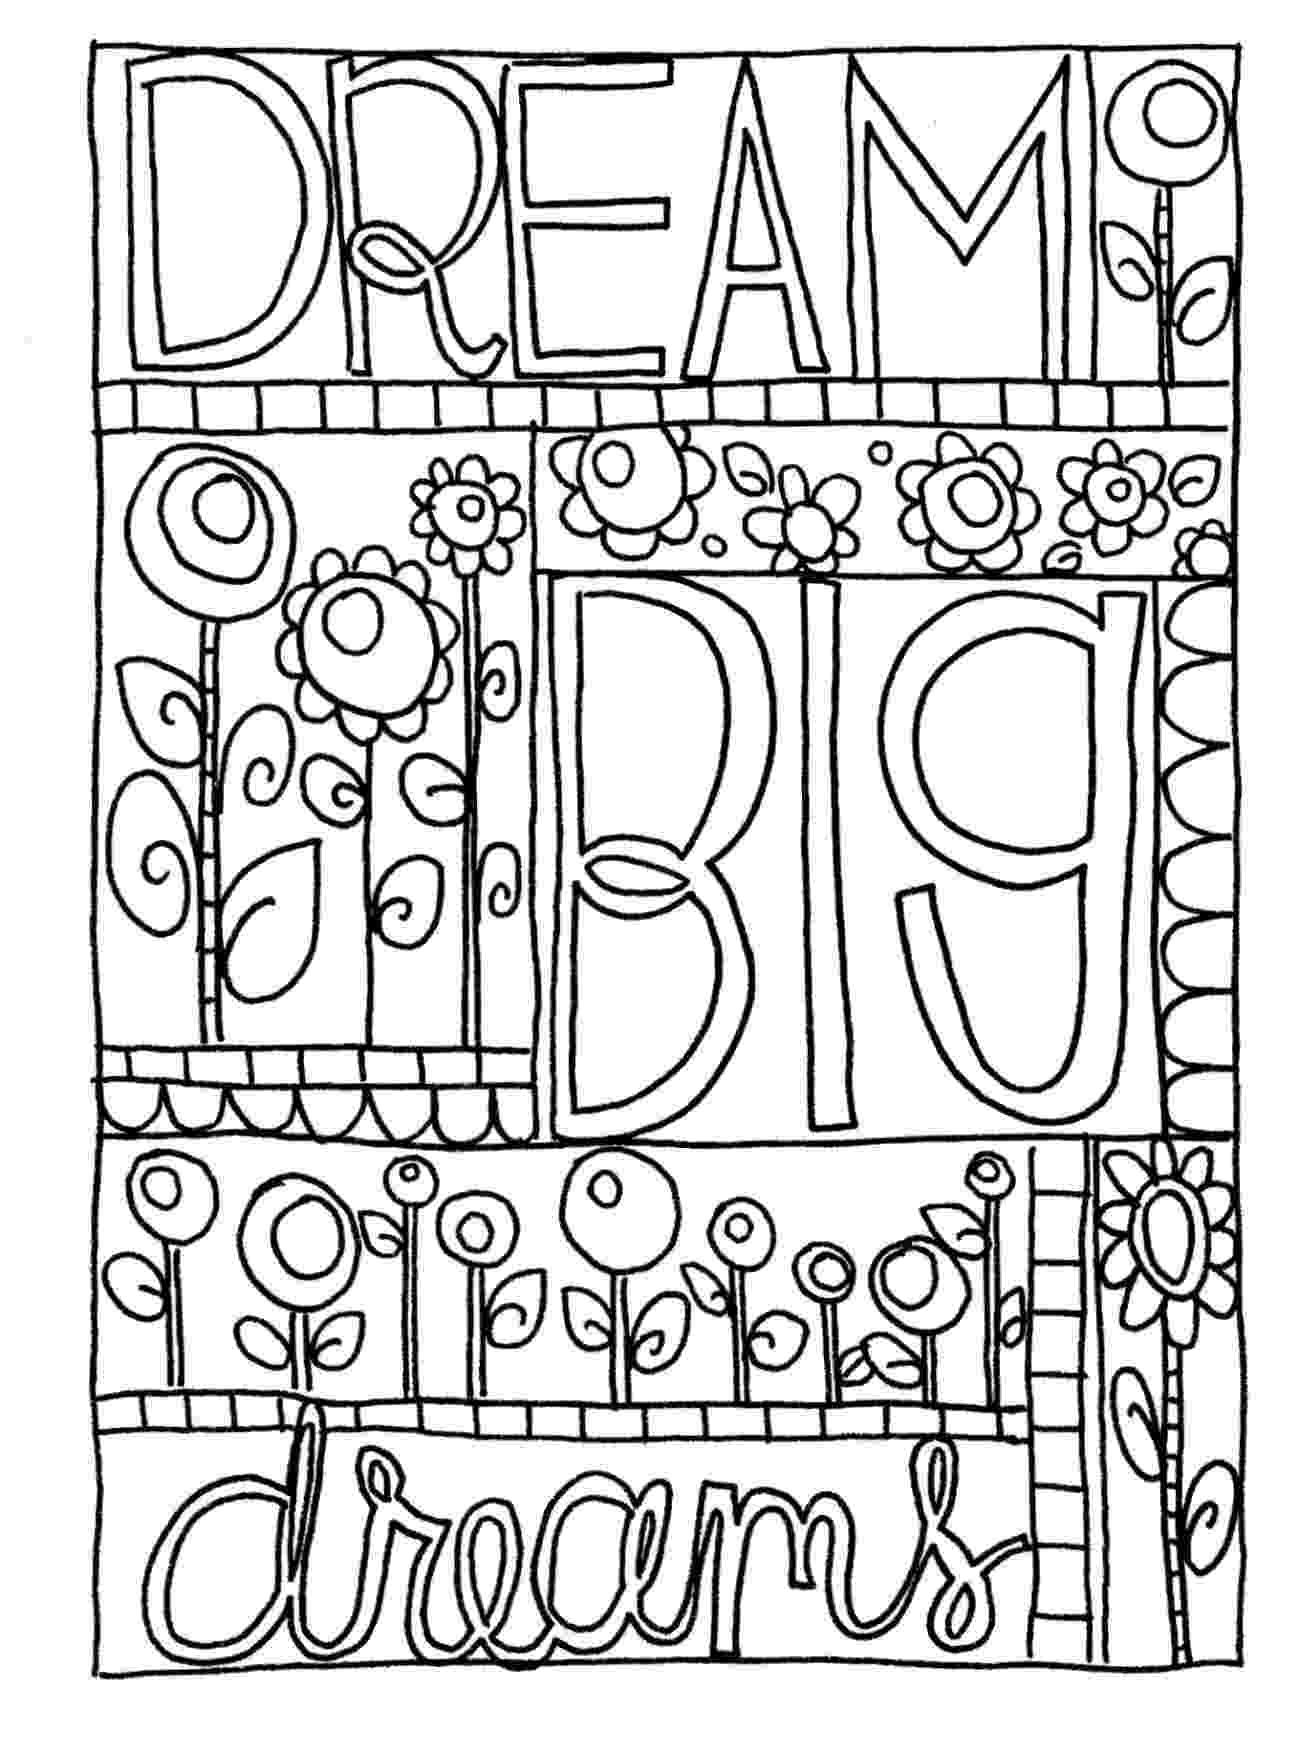 doodle art printables abstract doodle coloring page free printable coloring pages doodle printables art 